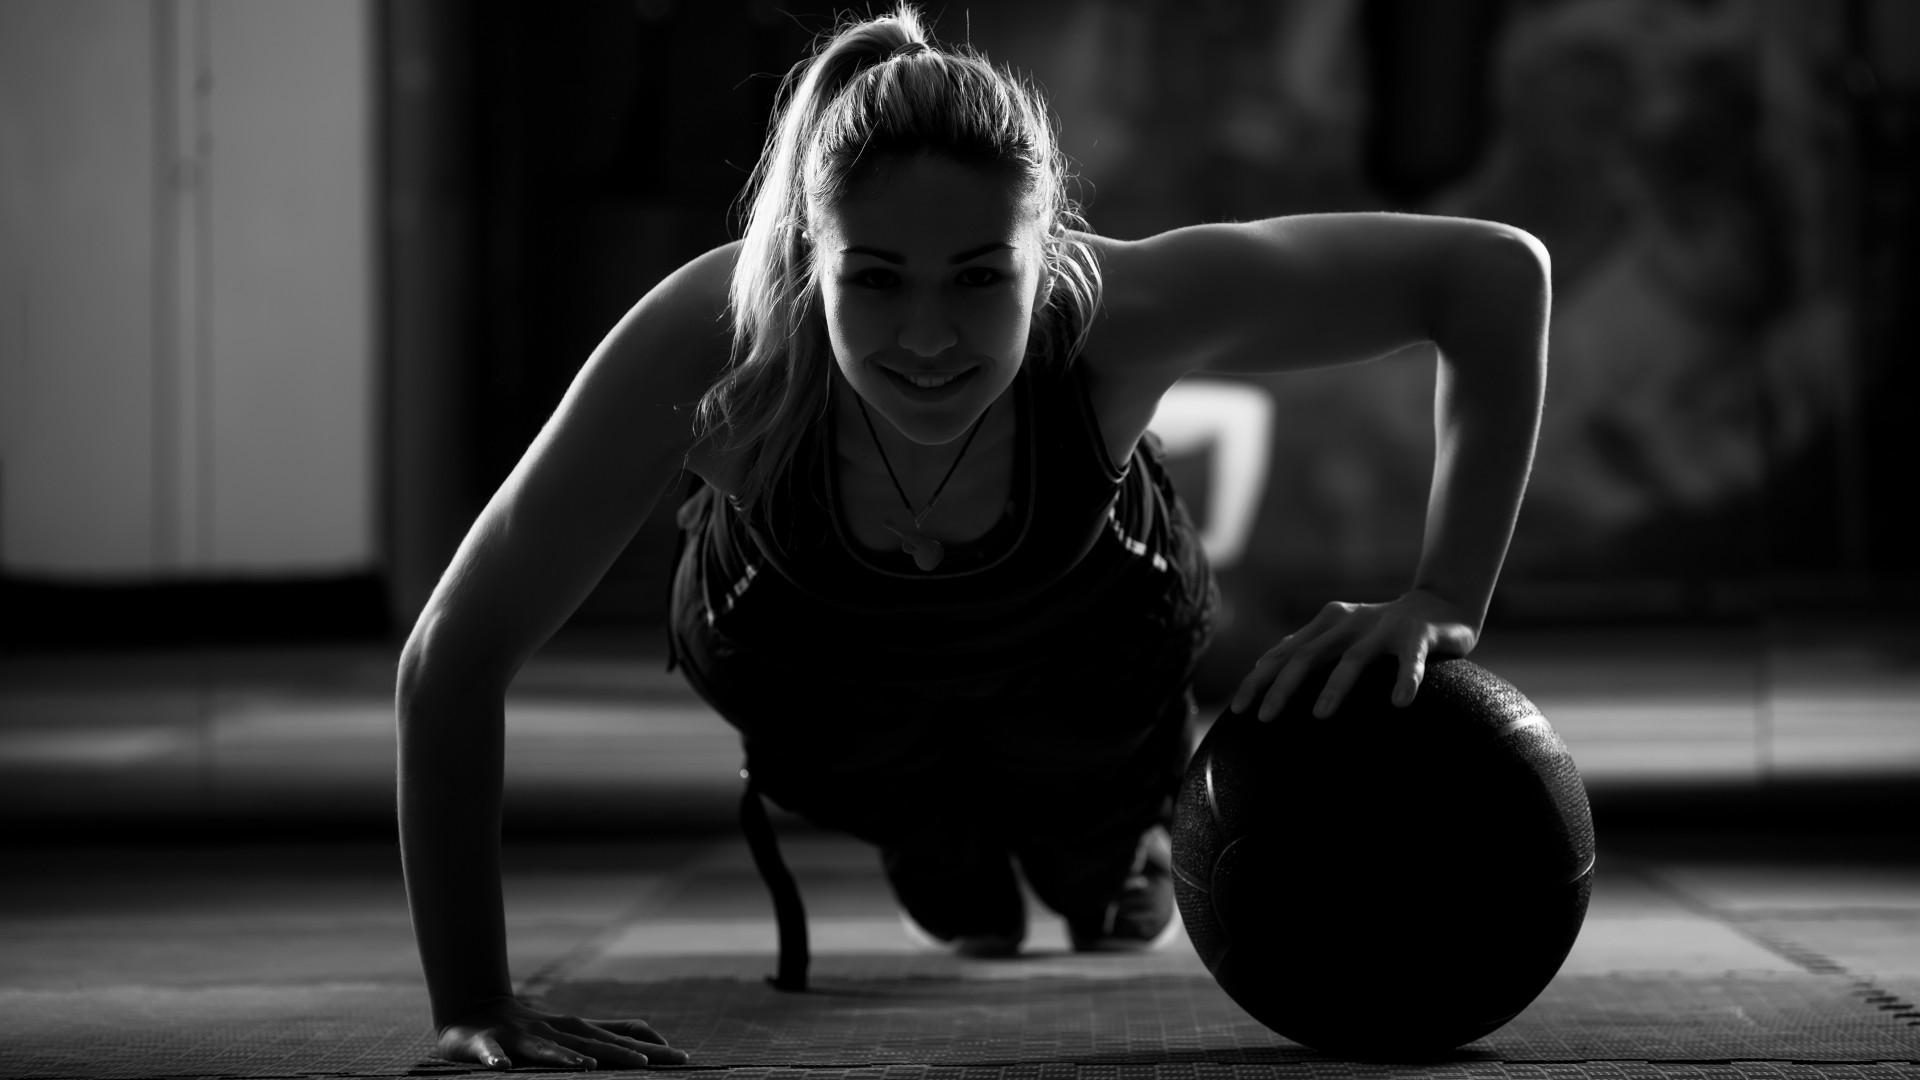 fit wallpaper,physical fitness,black and white,ball,monochrome,press up